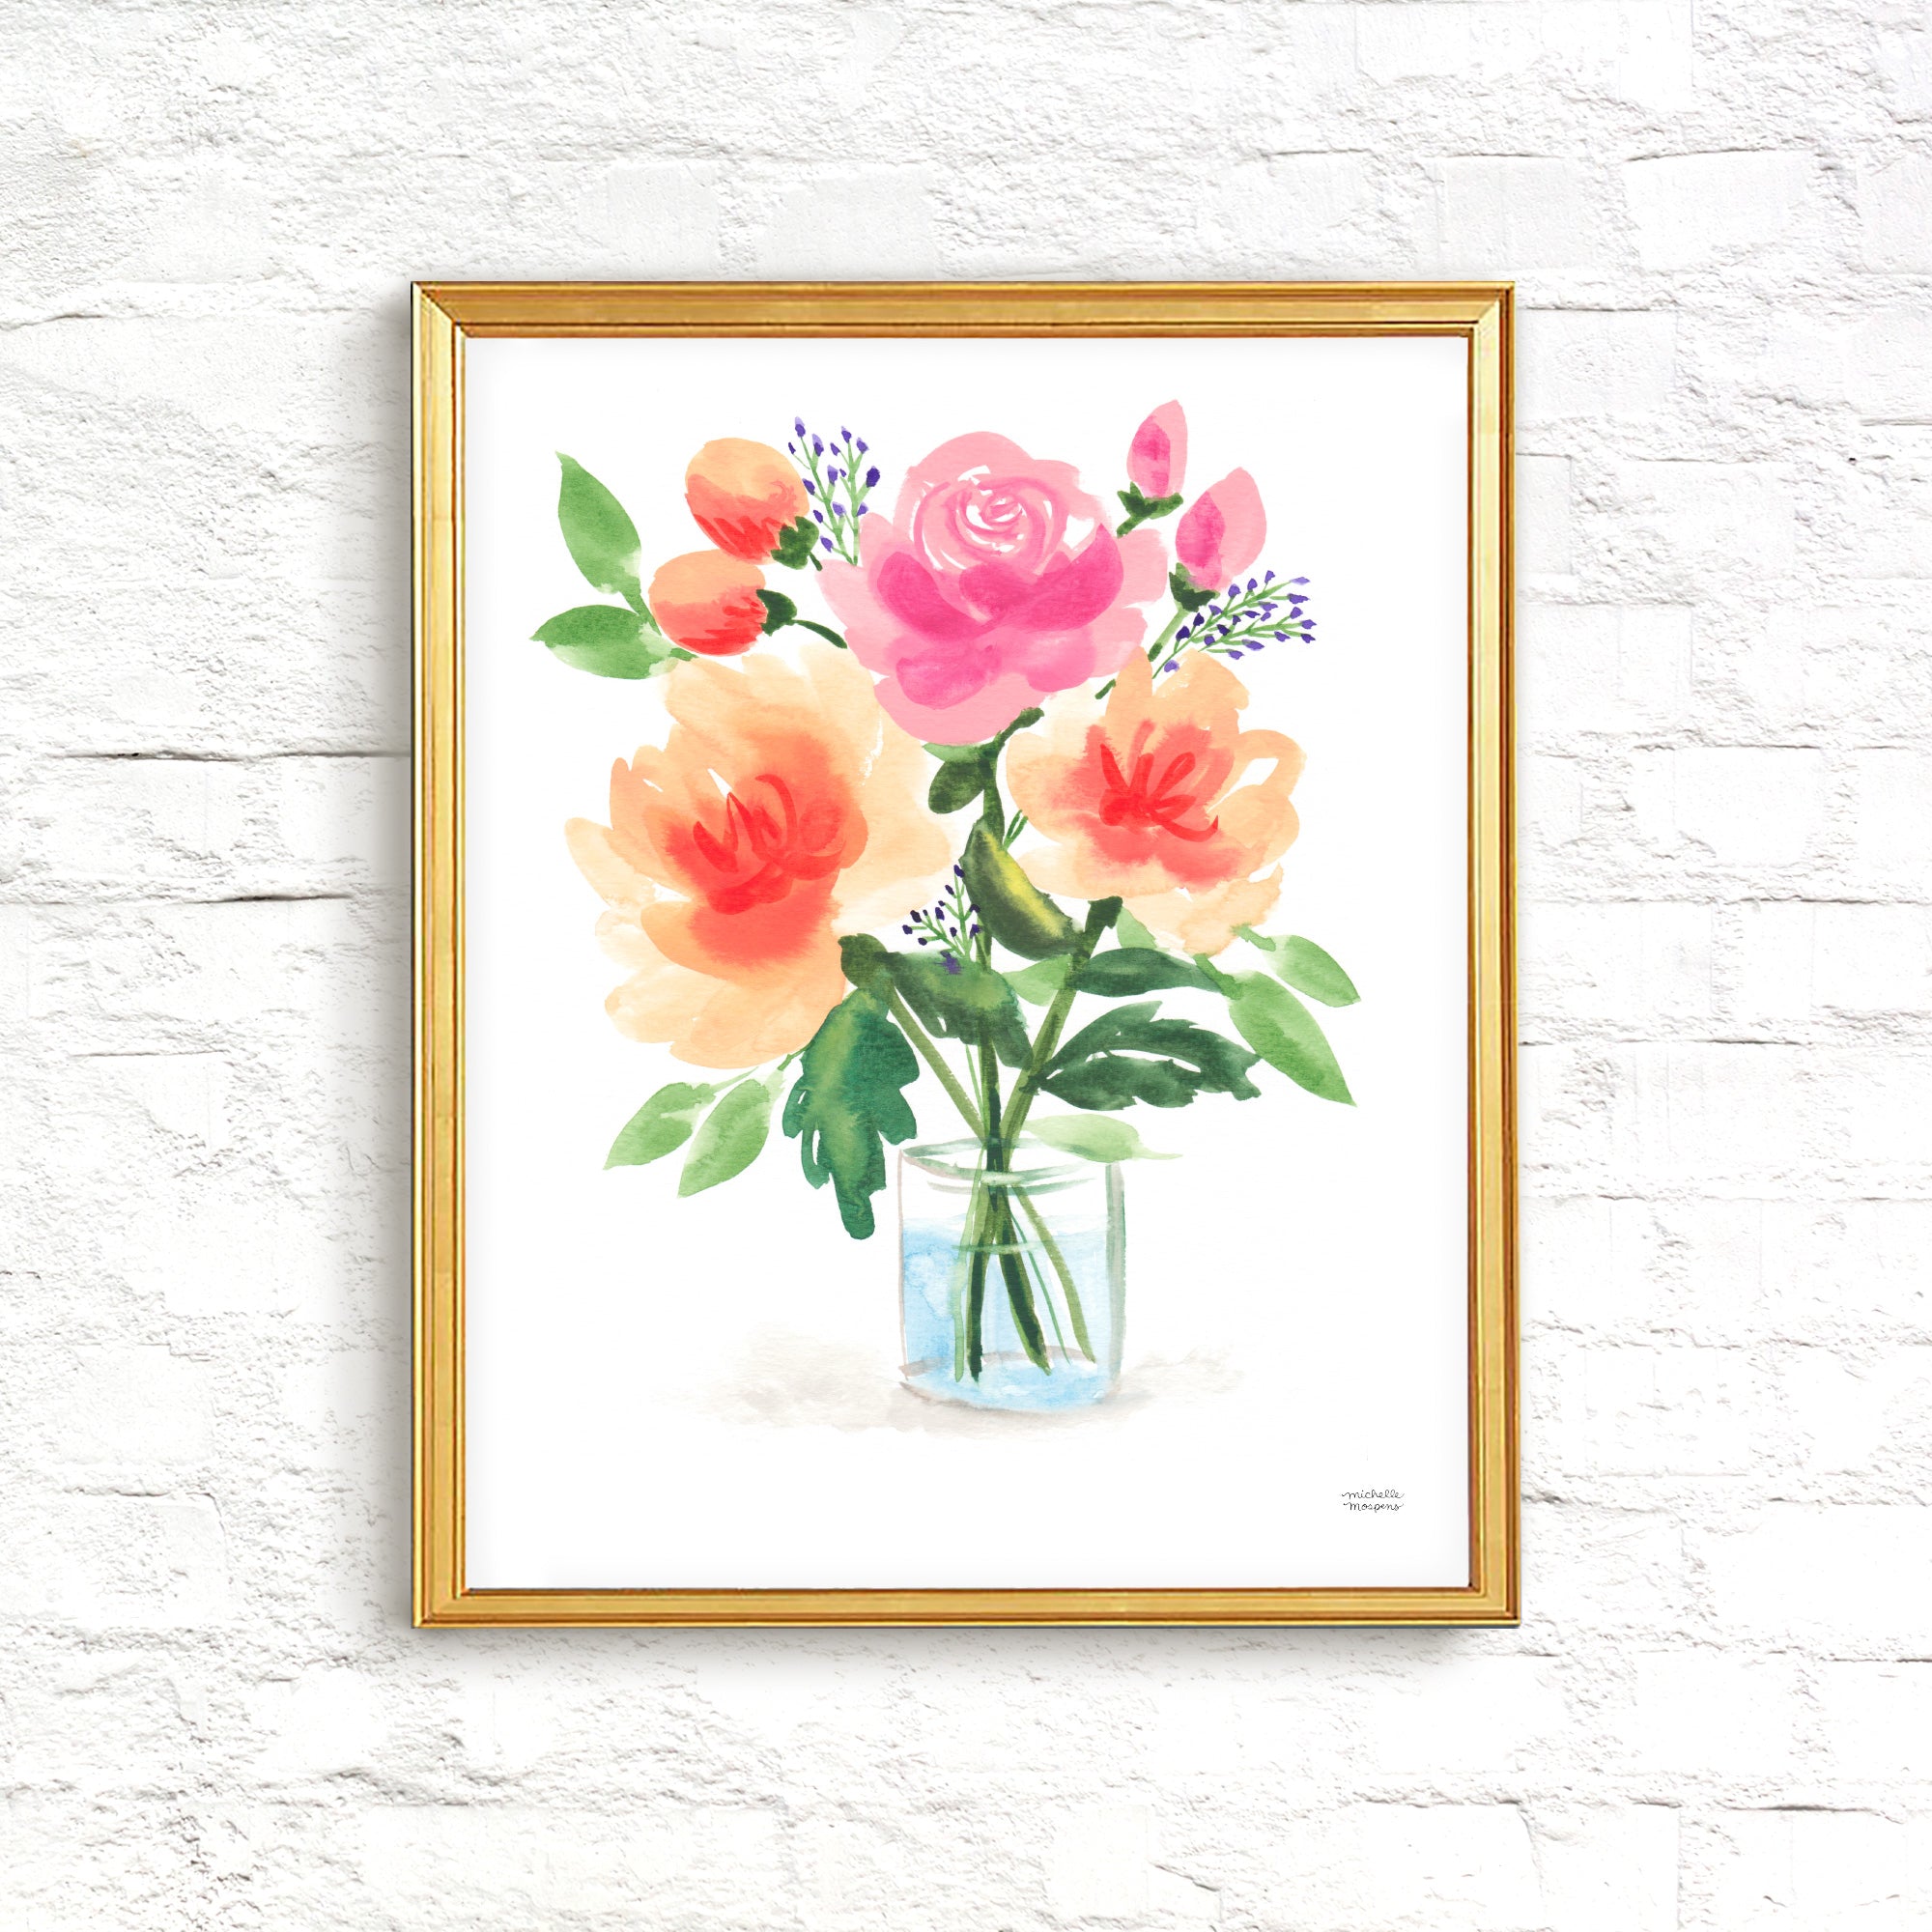 Painterly Peach Orange Peony Floral Bouquet Wall Art Print by Michelle Mospens